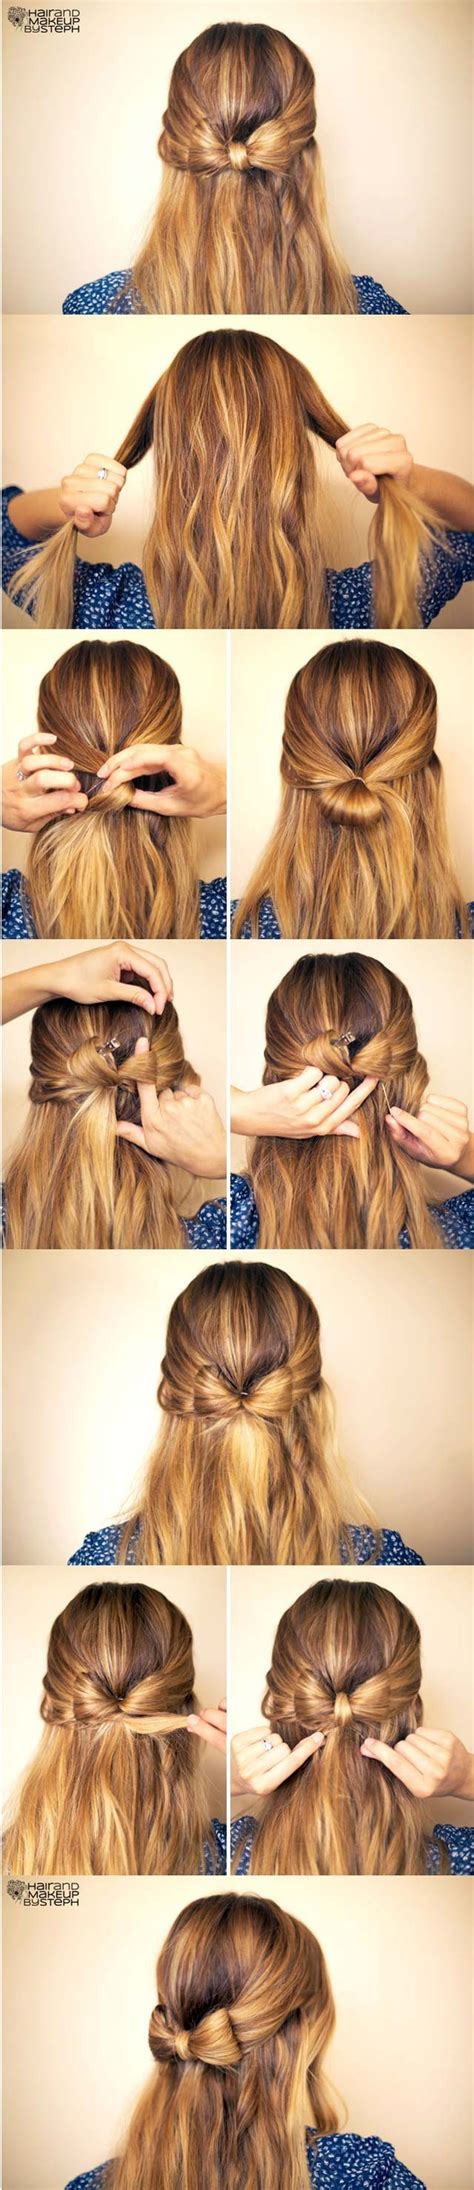 cute easy hairstyles ideas for girls the xerxes